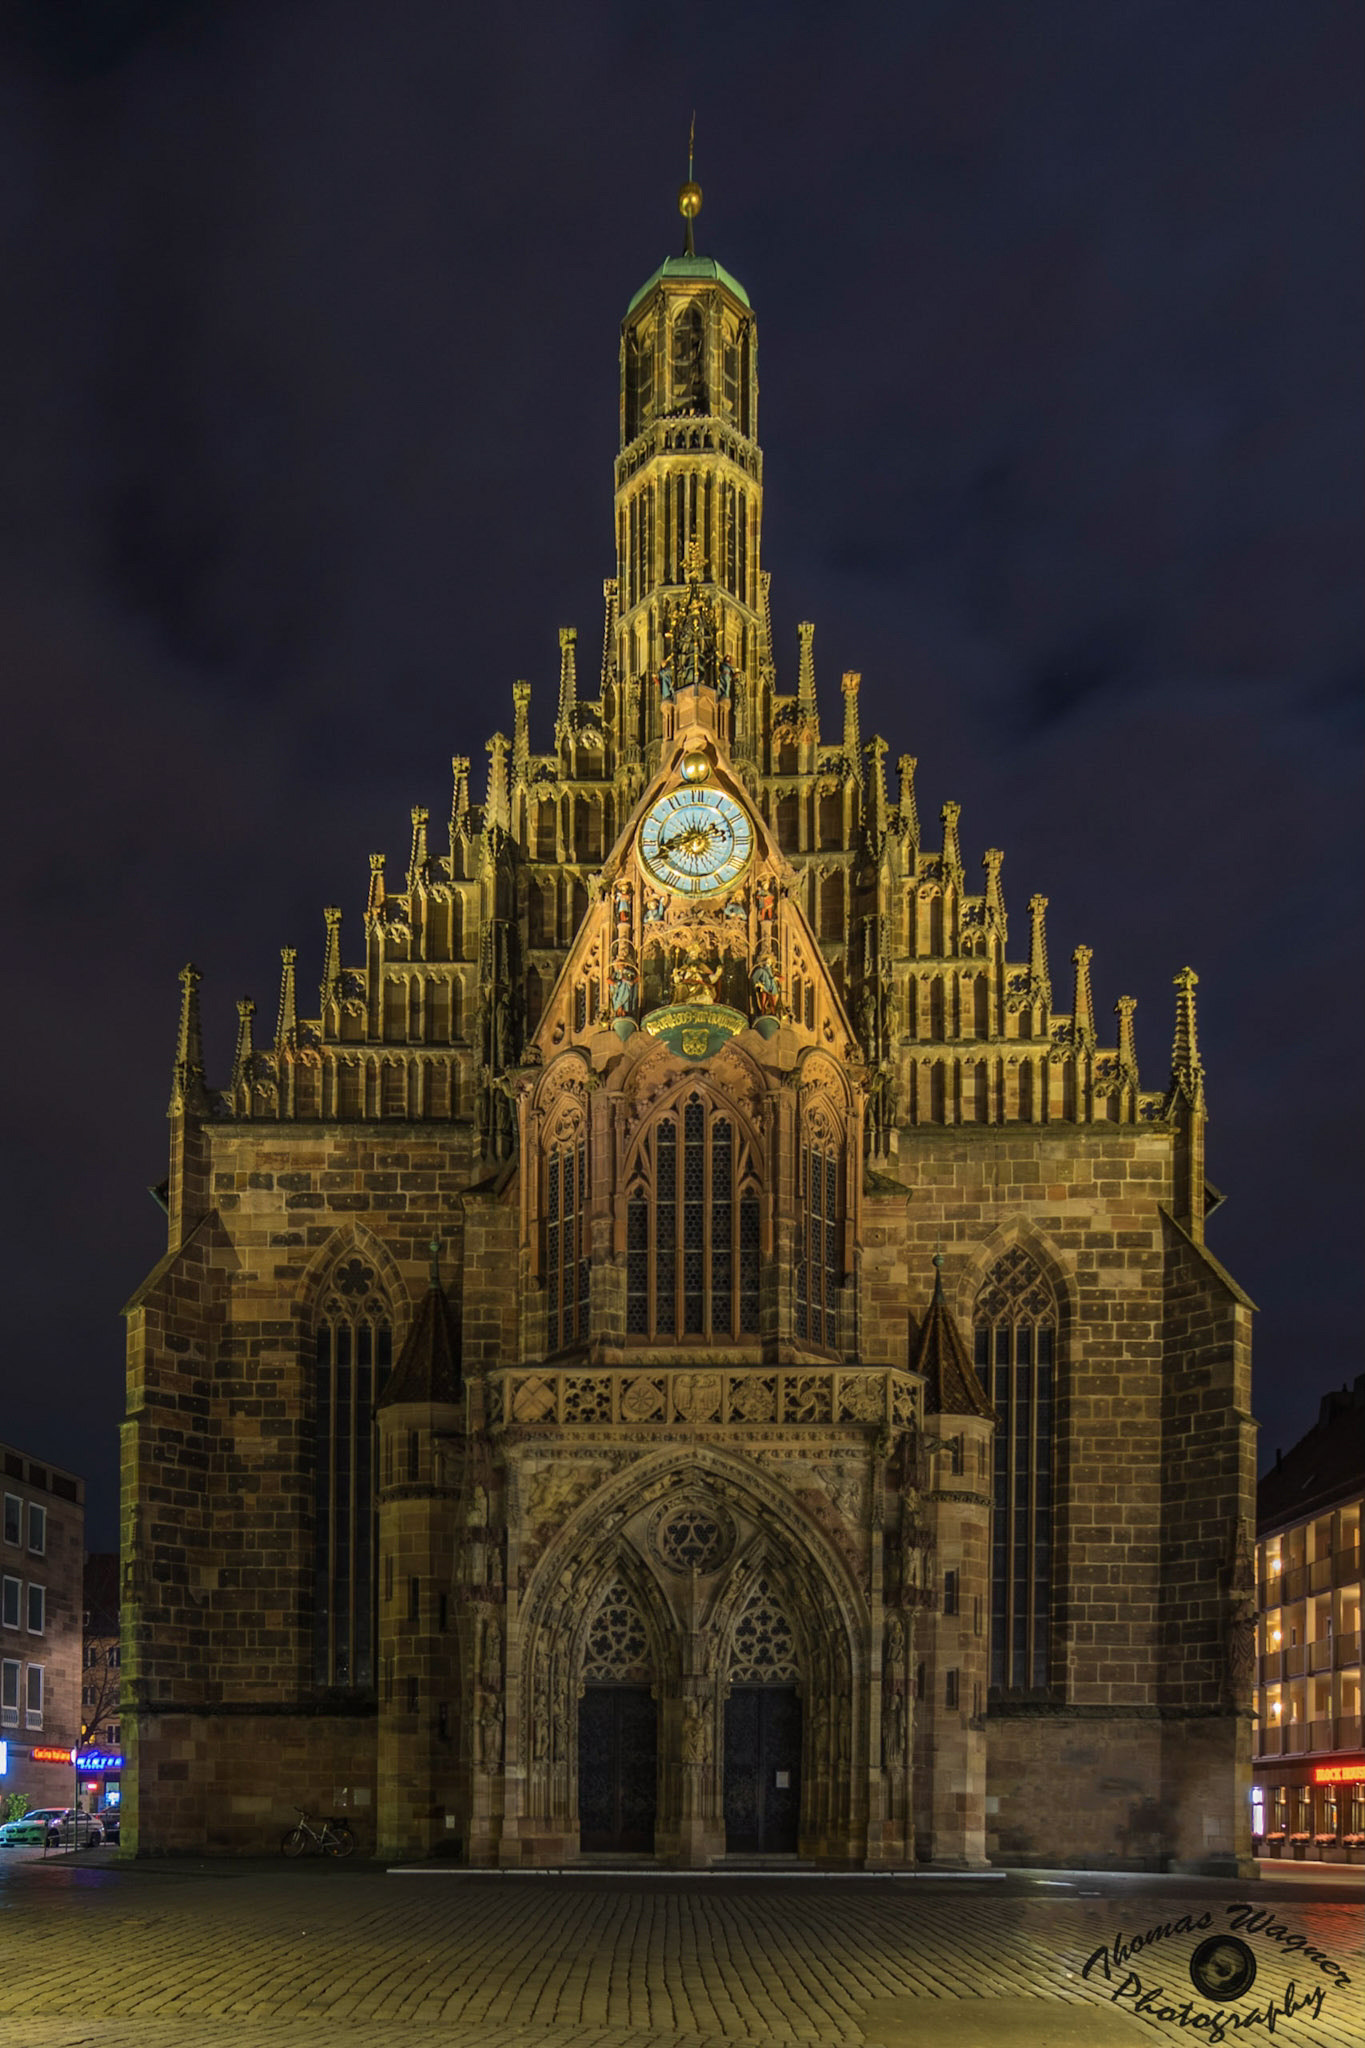 Sony a7 II sample photo. Church in nürnberg at night photography